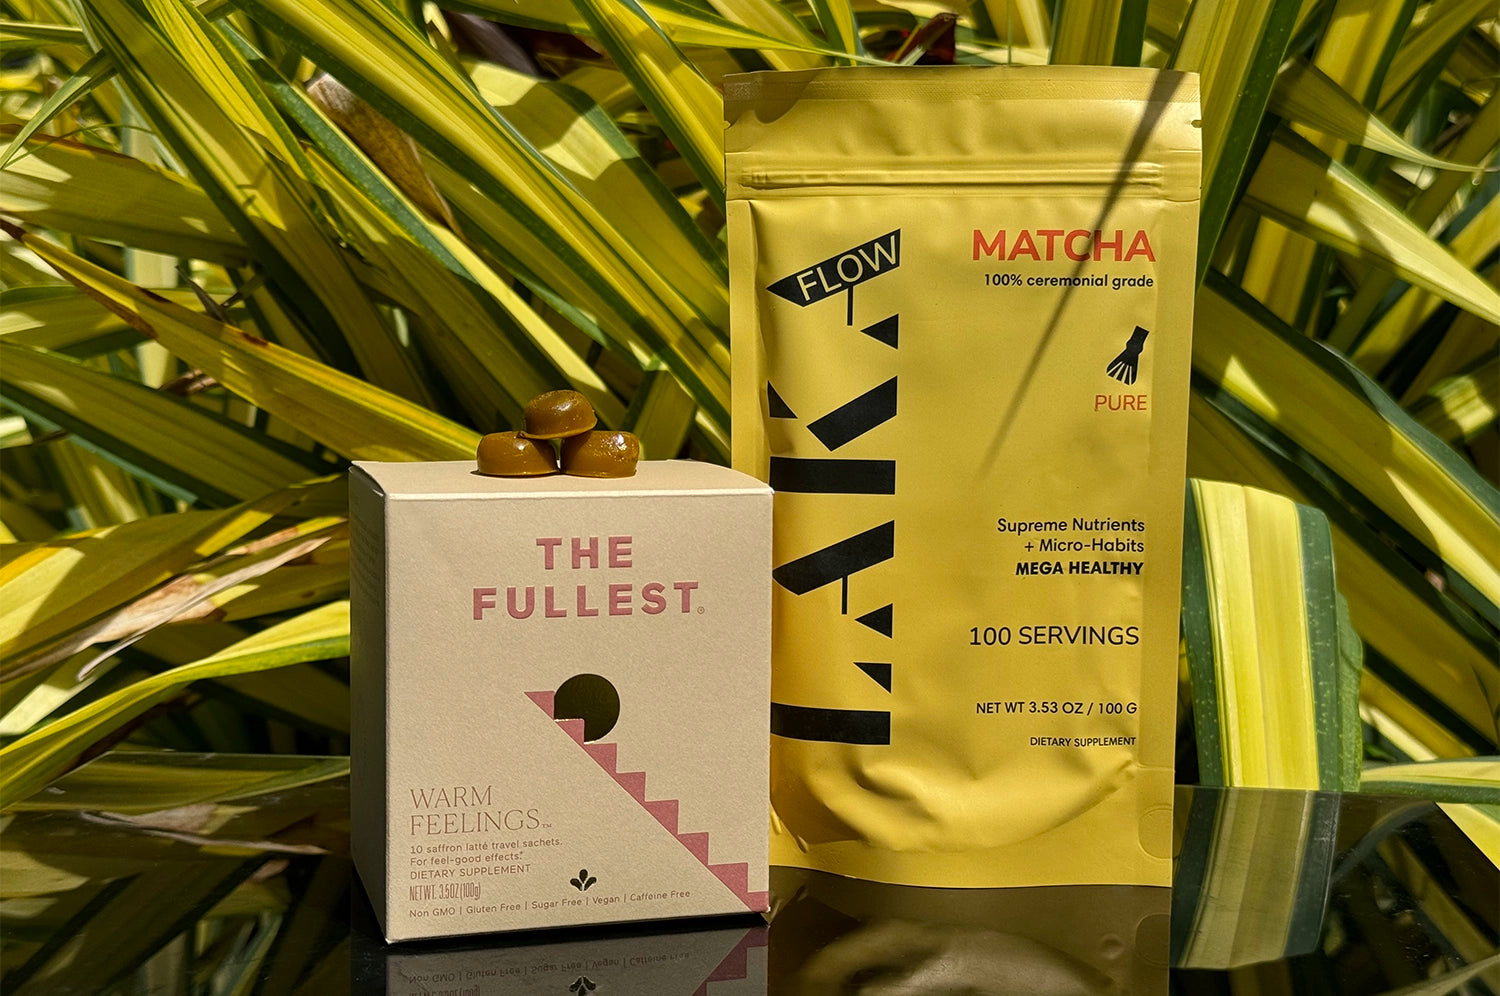 Health product packages for LAKA matcha and Warm Feelings saffron latte displayed against a background of green plant leaves.